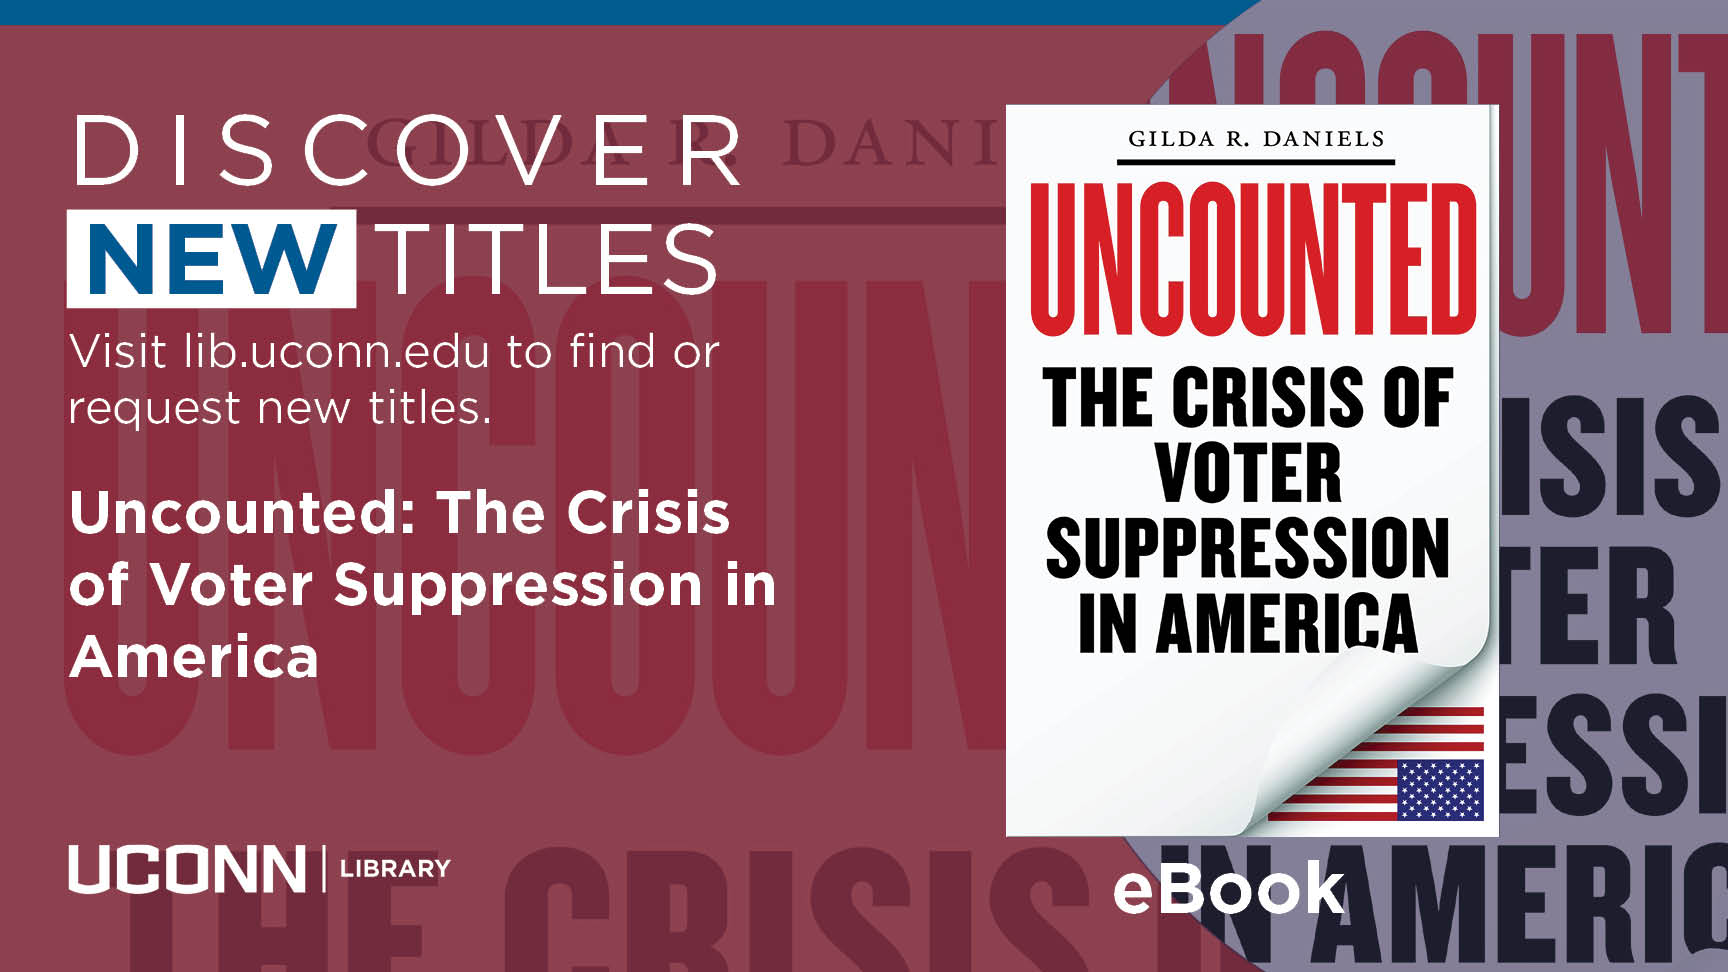 Discover New Titles, Visit lib.uconn.edu to find or request new titles.Uncounted: The Crisis of Voter Suppression in America, UConn Library, eBook